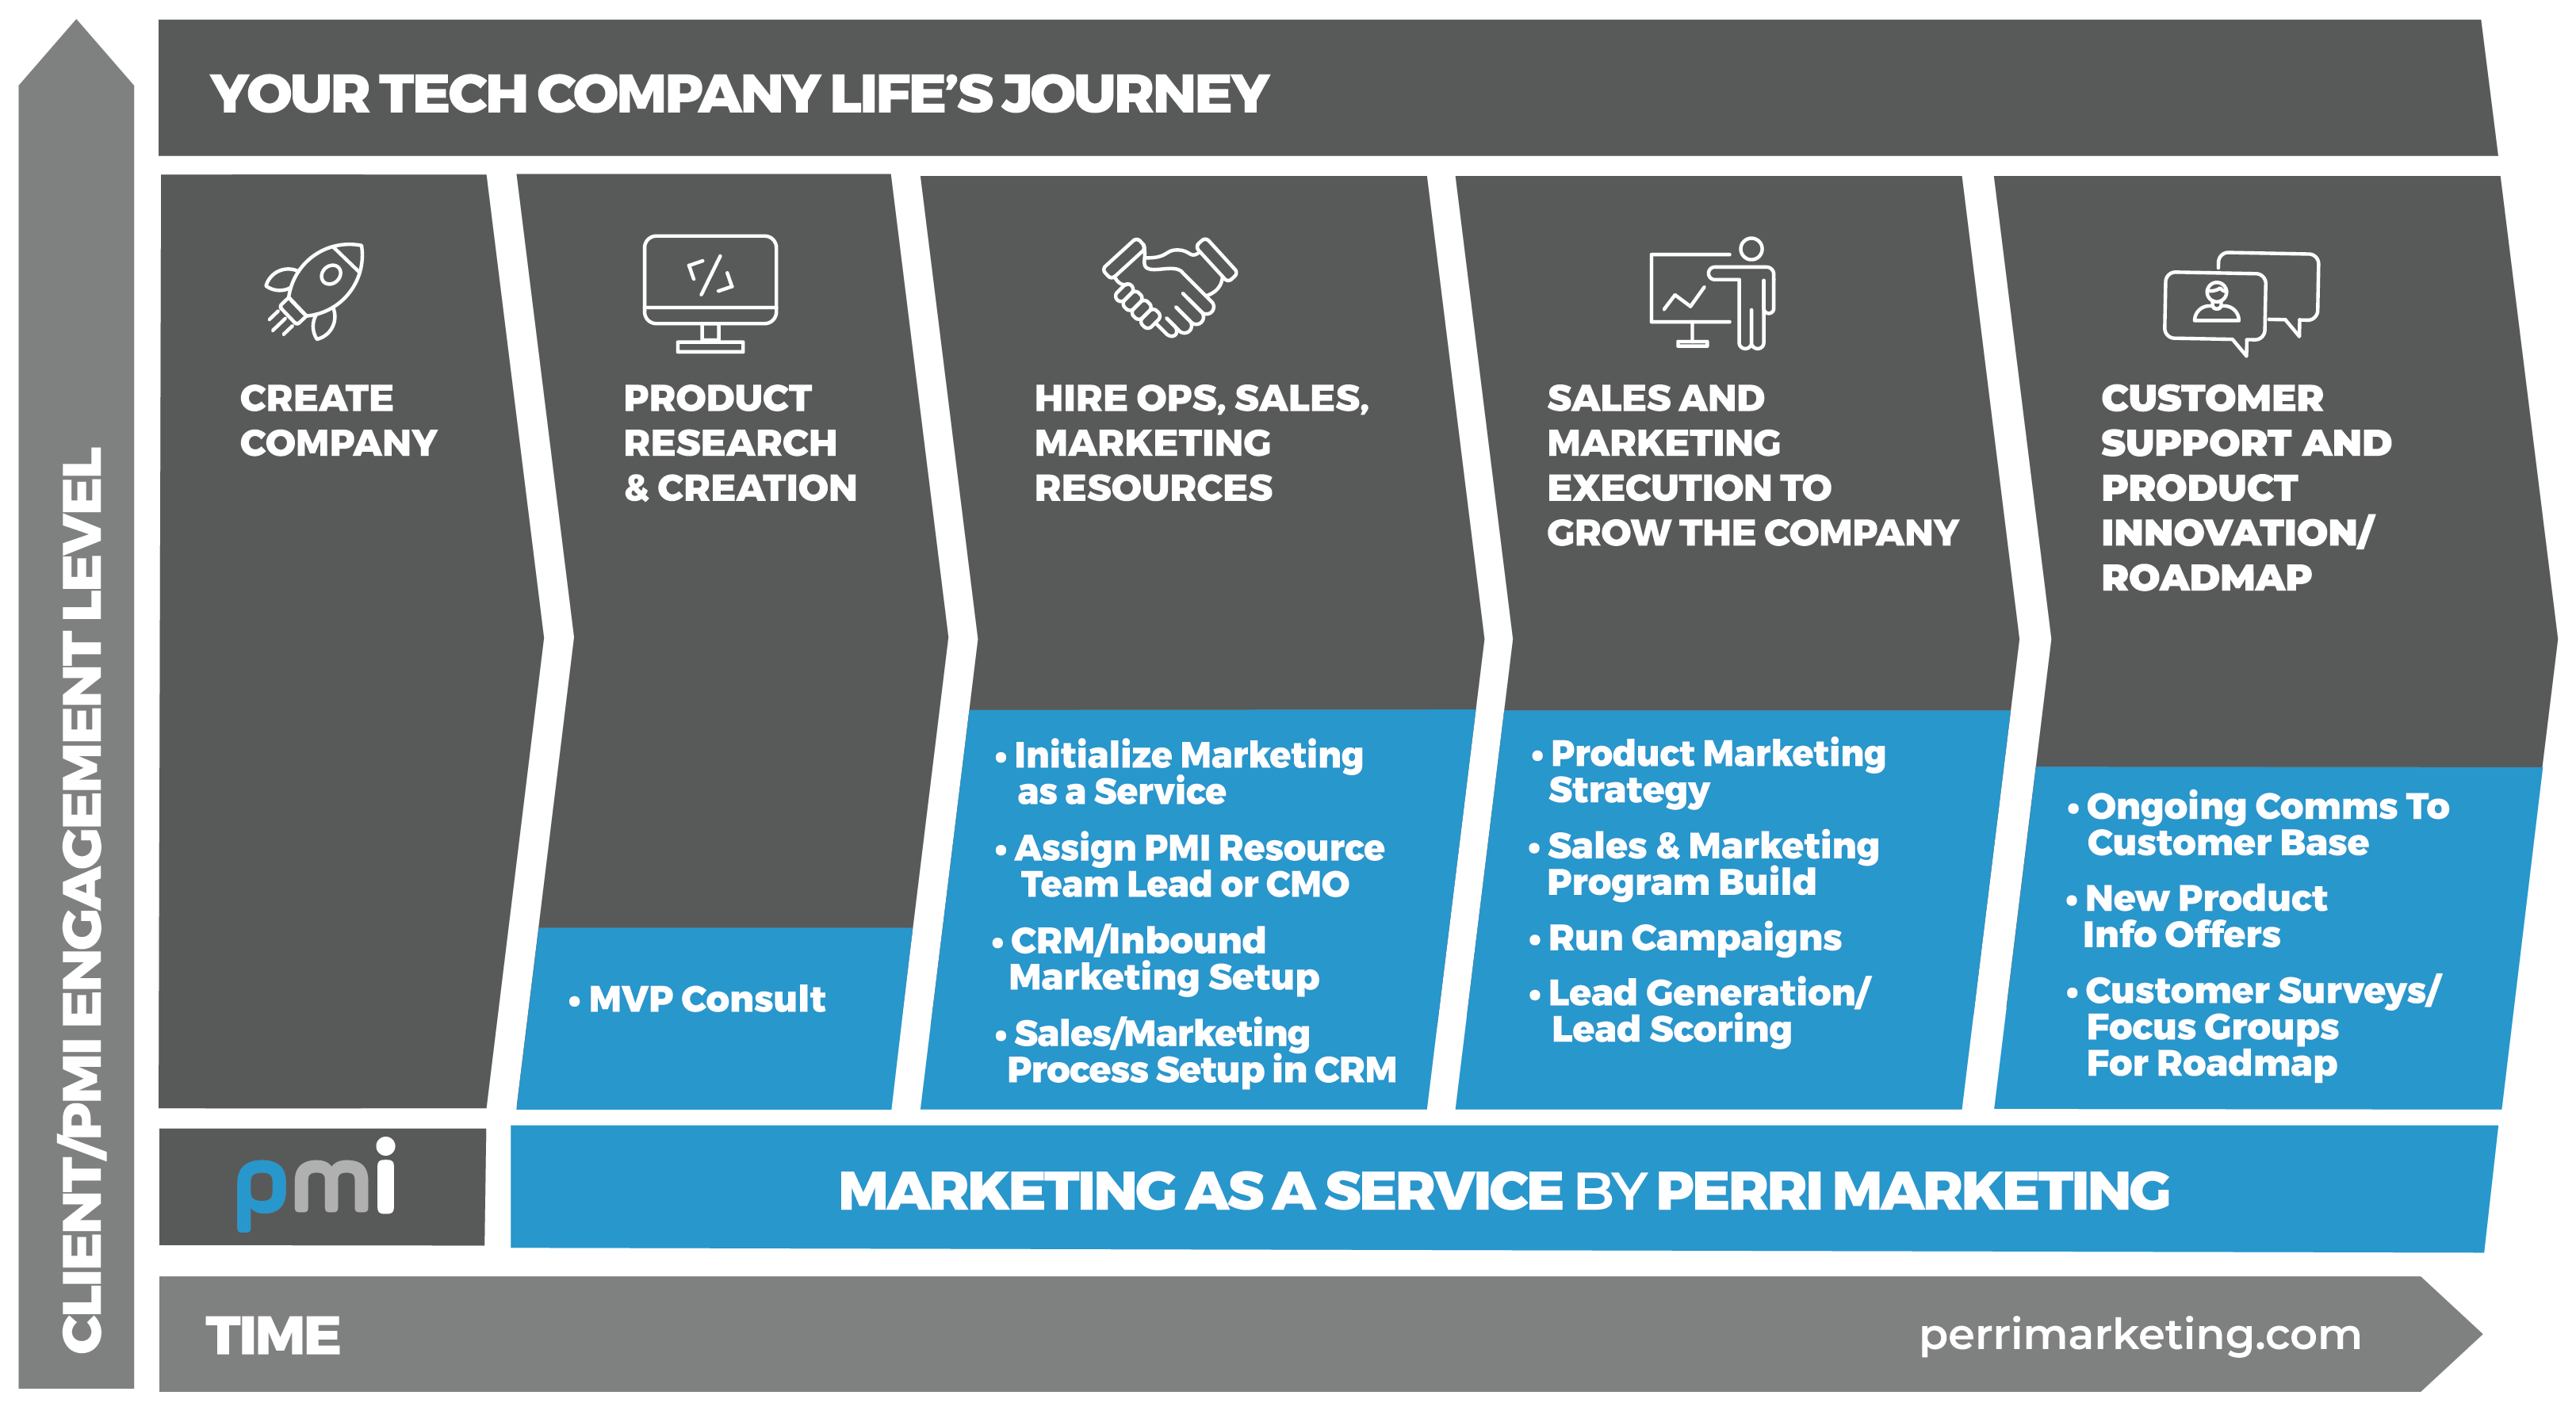 Perri Marketing - Marketing As A Service Infographic 1